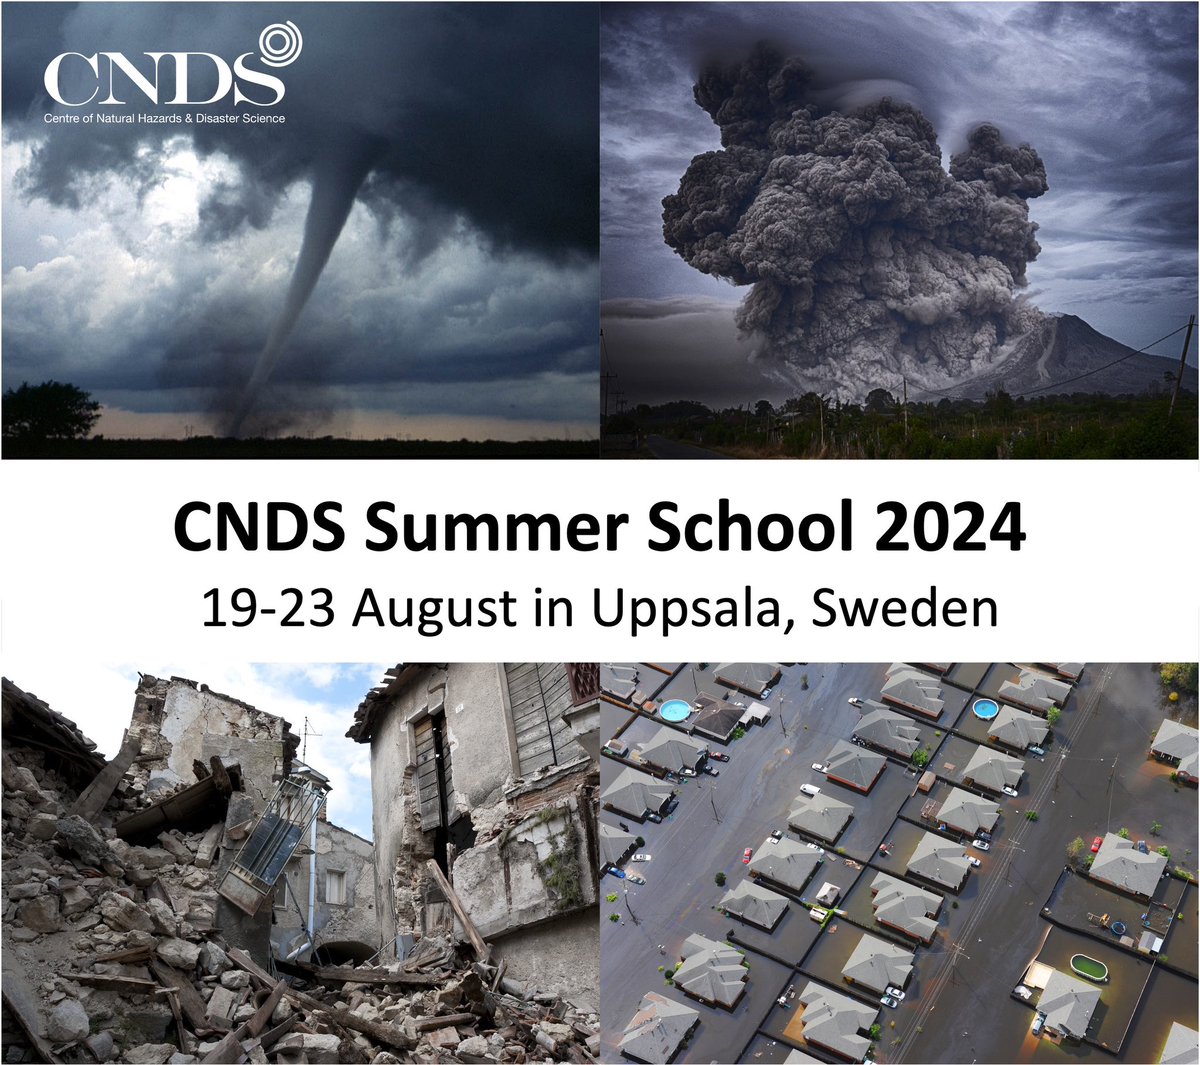 Save the date! Our Summer School on Natural Hazards will take place 19-23 August in Uppsala, Sweden. It will focus on the interplay of extreme events and social vulnerabilities. Applications open 8 April. More info: cnds.se/research/summe…